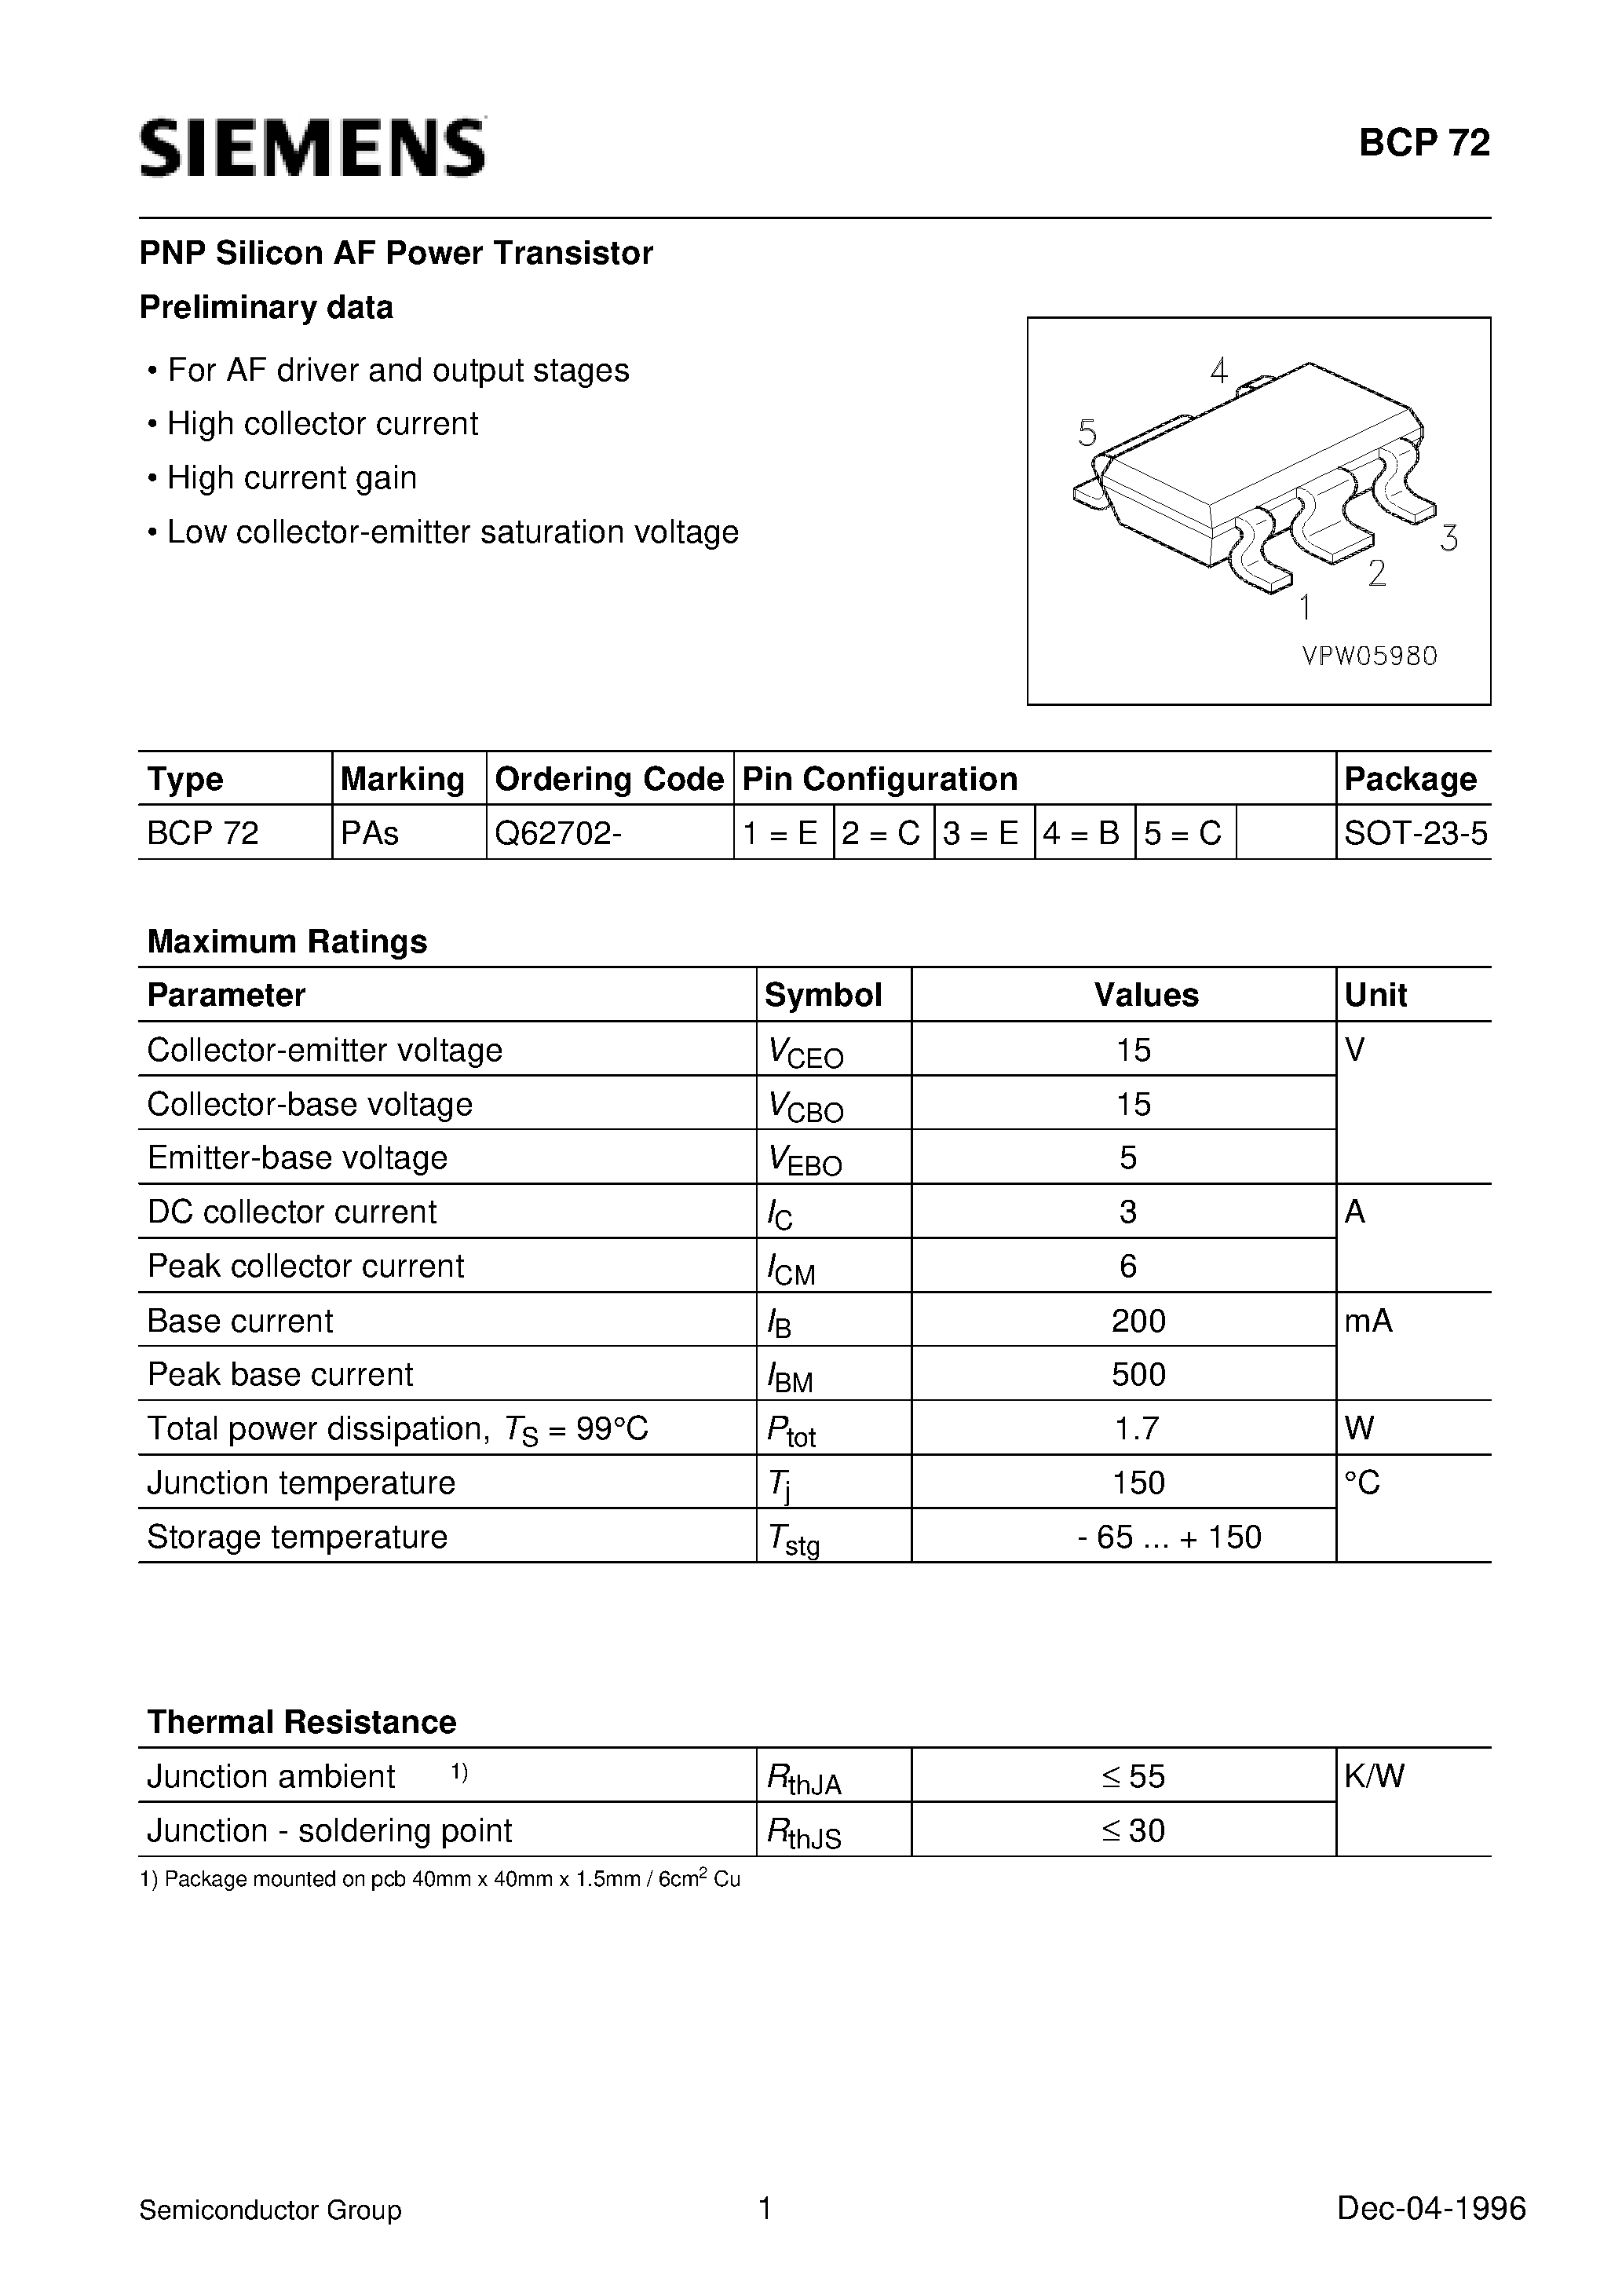 Datasheet BCP72 - PNP Silicon AF Power Transistor (For AF driver and output stages High collector current High current gain) page 1